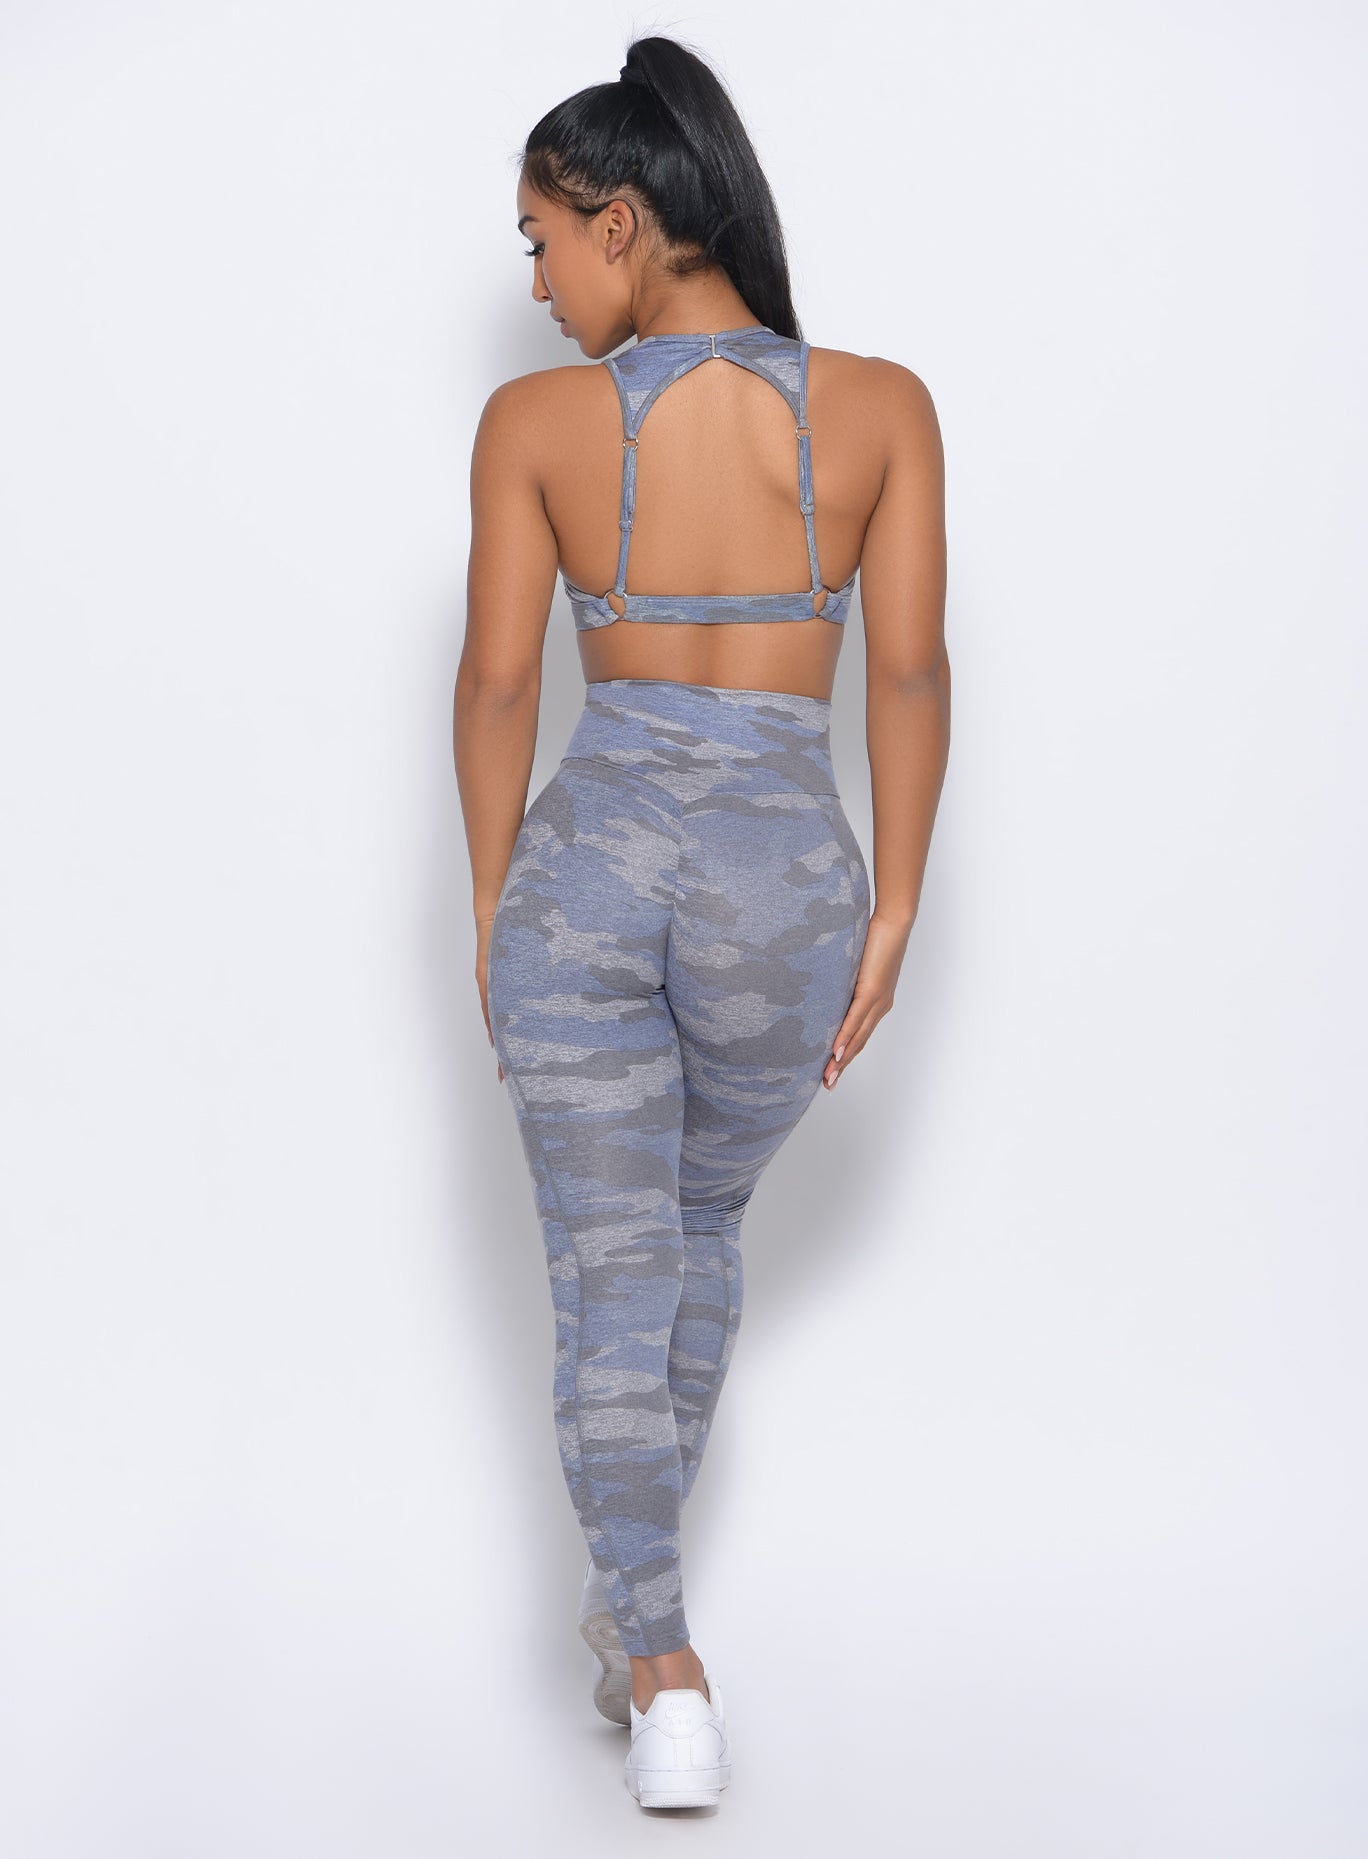 Back view of the model in our Brazilian contour leggings in silver camo color and a matching bra